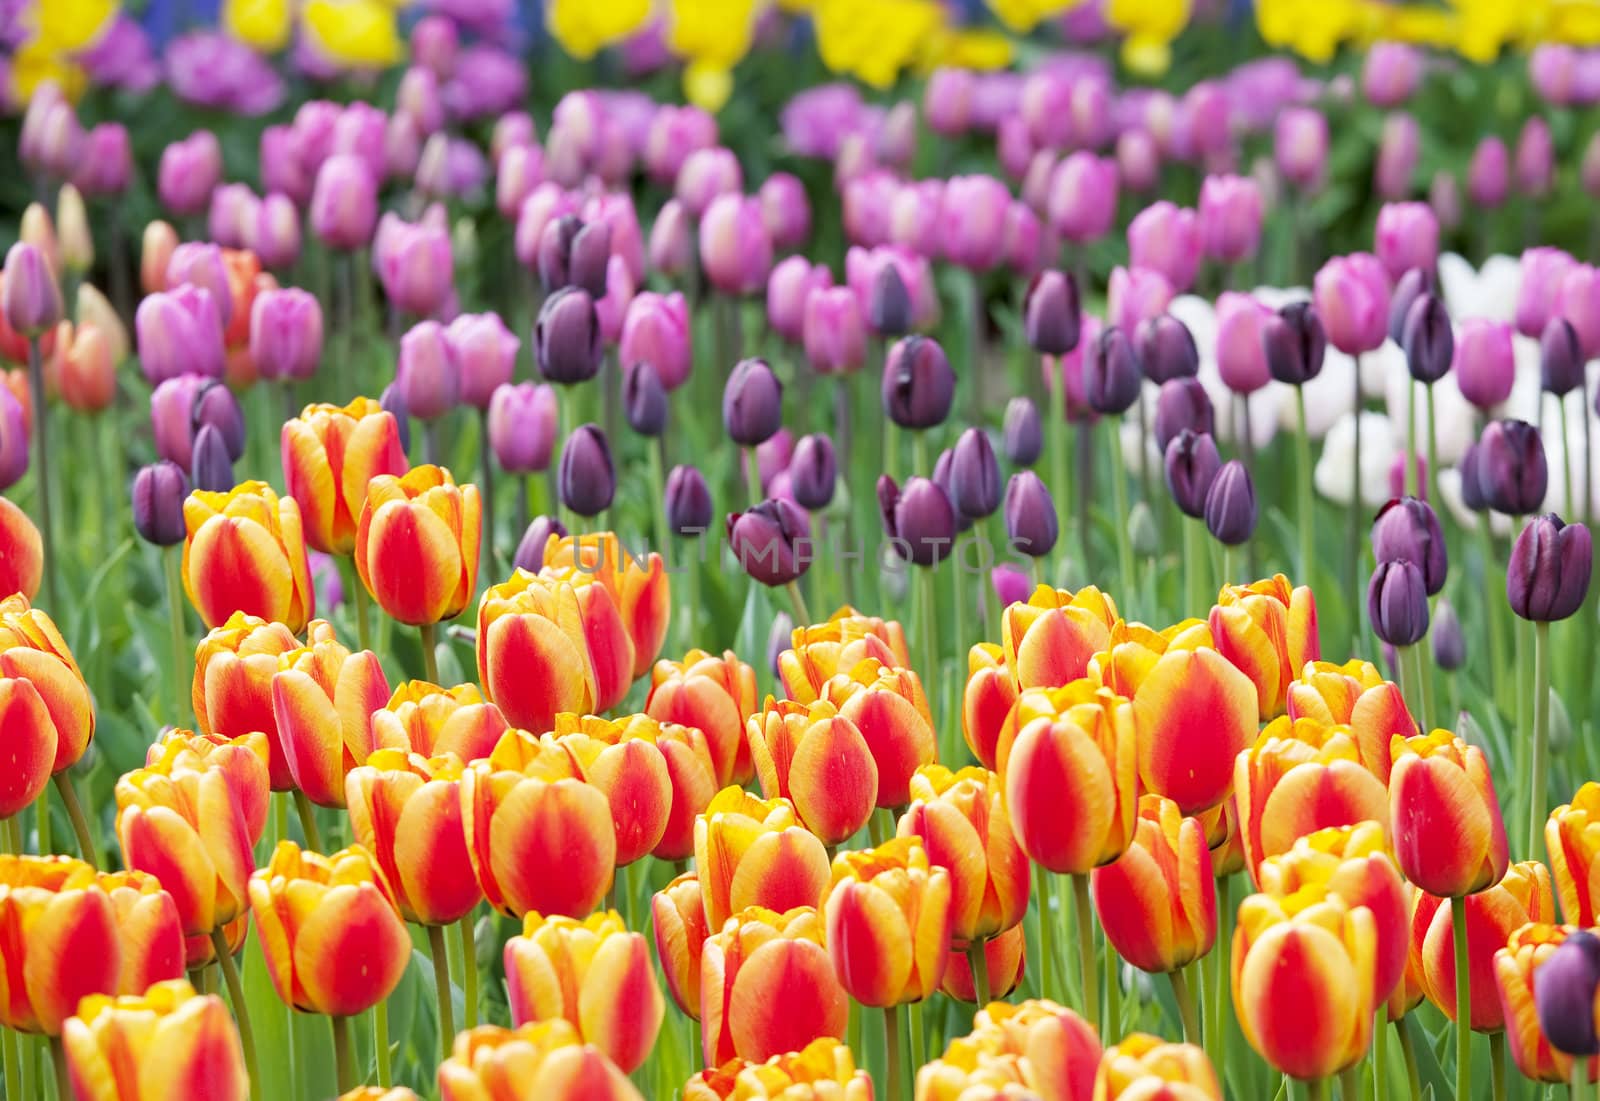 Colorful sea of beautiful tulips in full bloom. “Courtesy of RoozenGaarde (Tulips.com).”